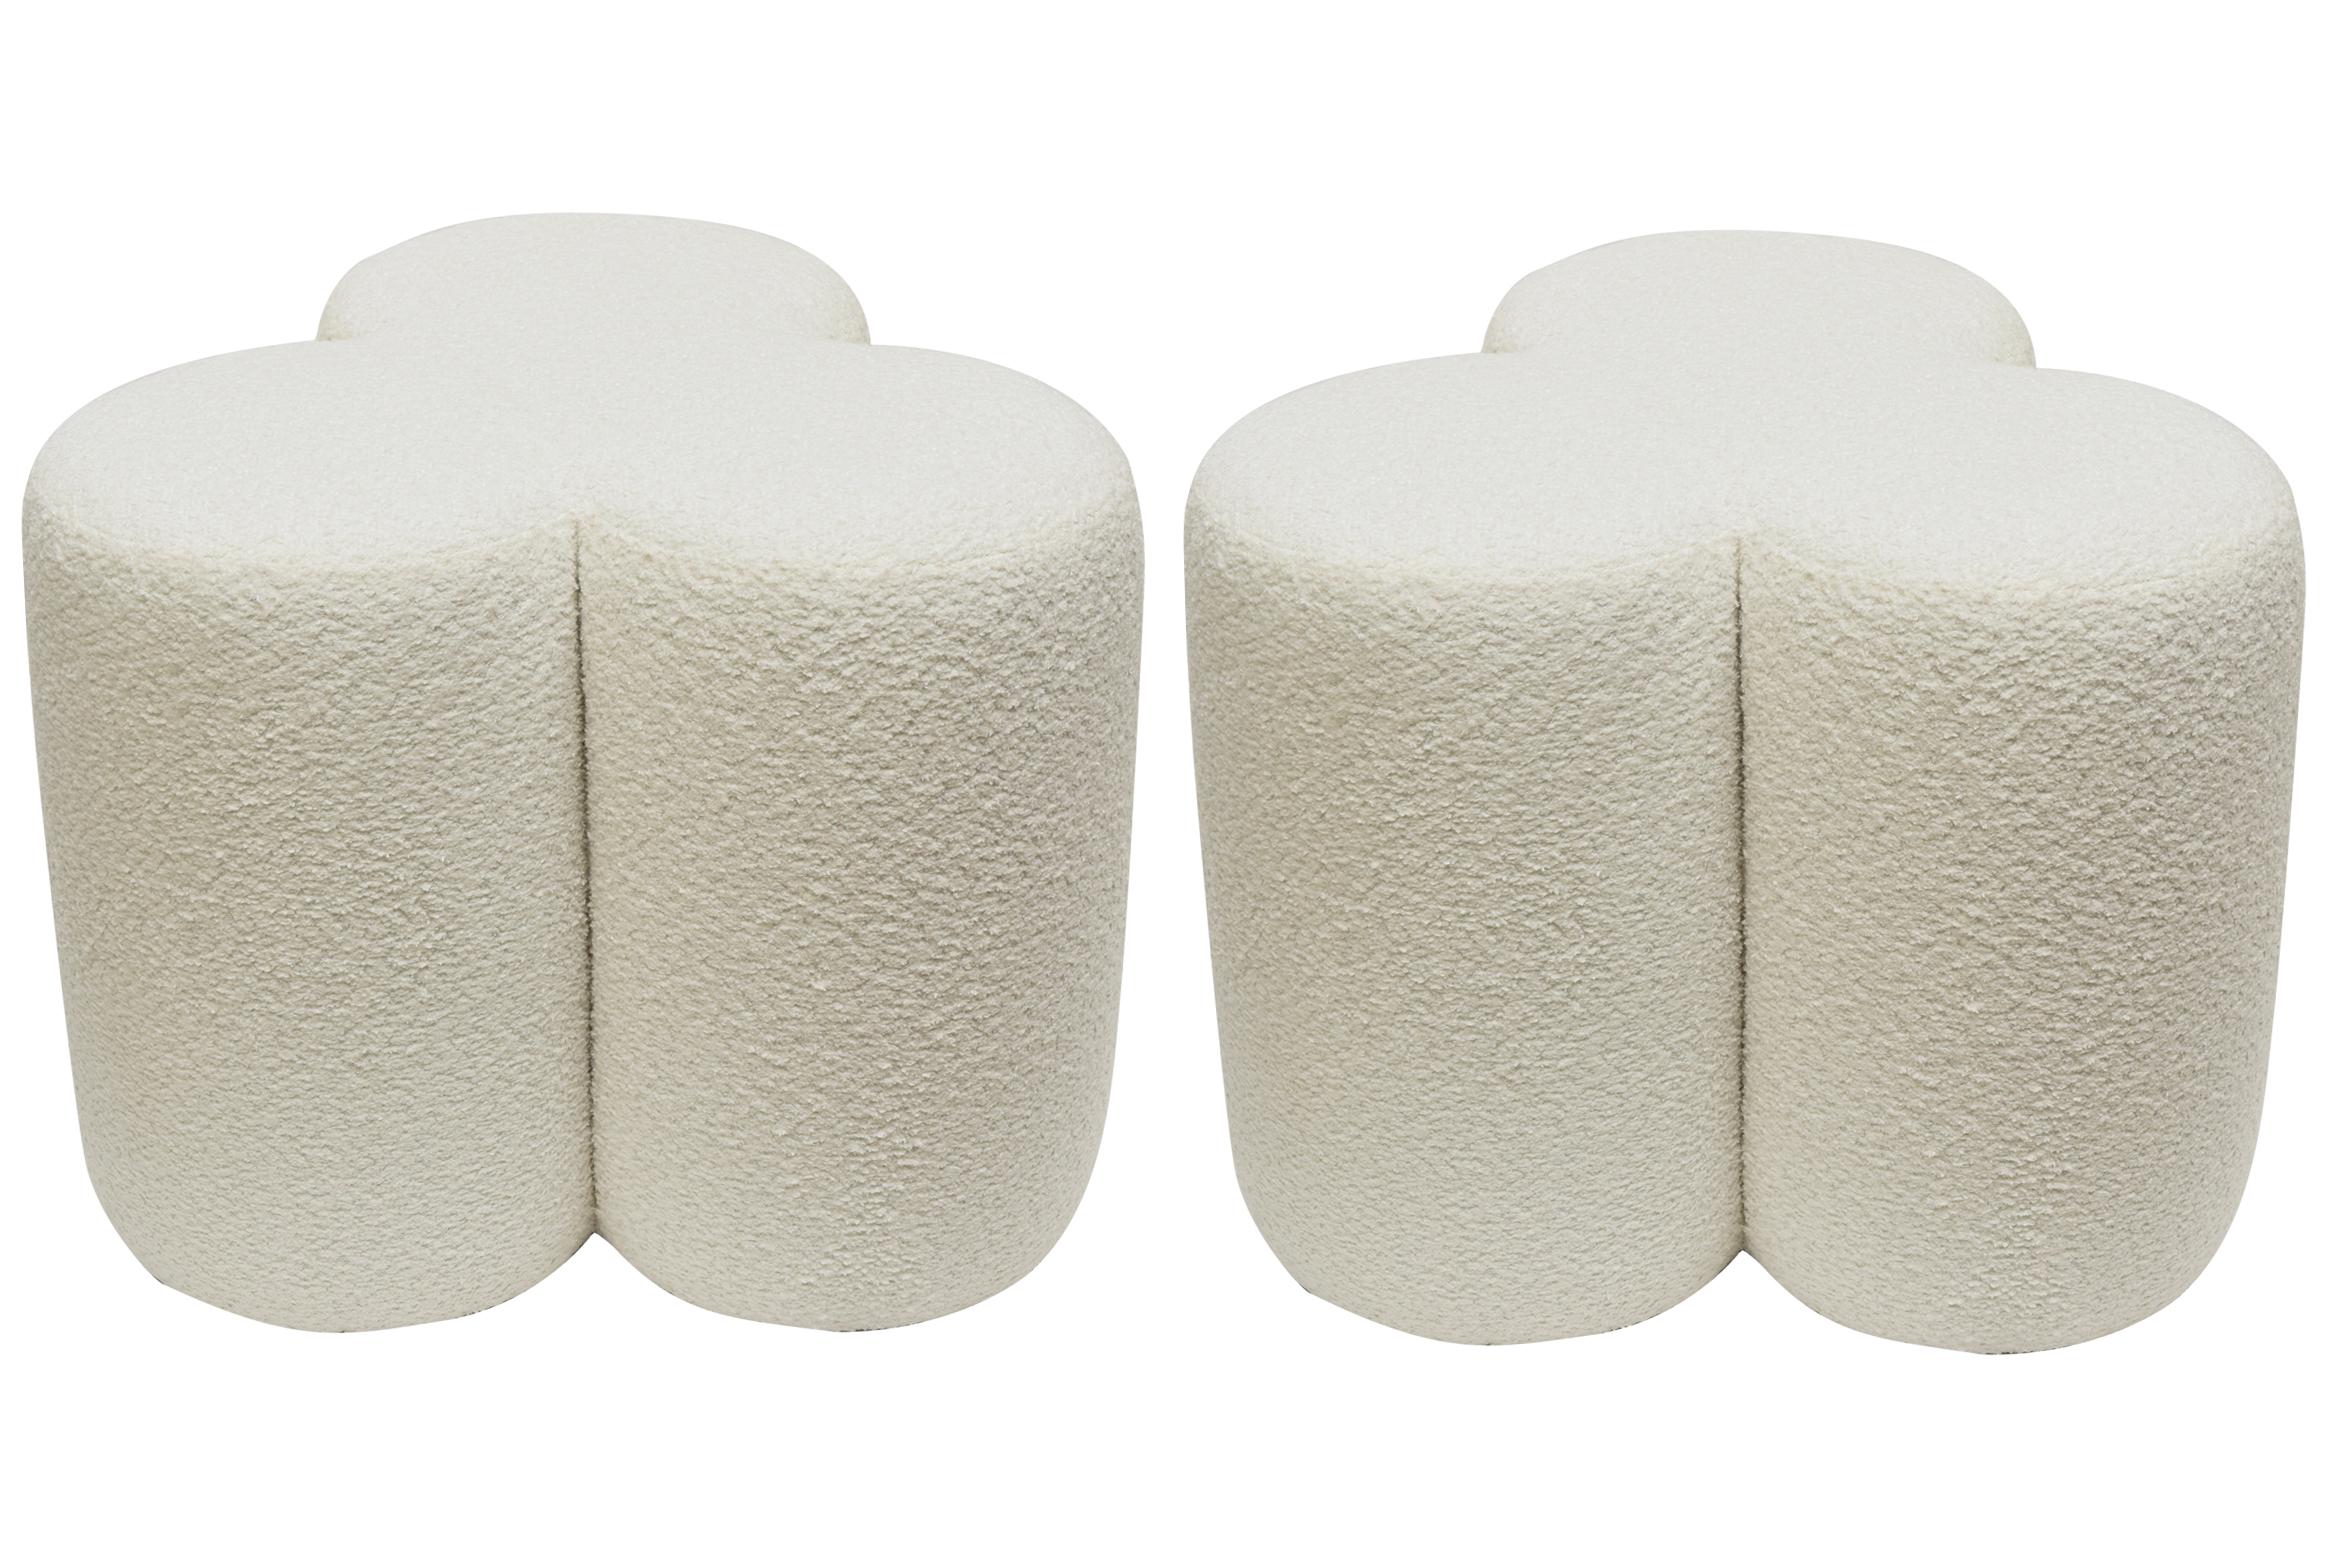 These new contemporary modern ottomans or small benches have beautiful new white bouclé fabric with dacron padding over the wood structure. They are called THE CLOUD. The white bouclé is a krypton fabric which will clean with ease. Very chic with a